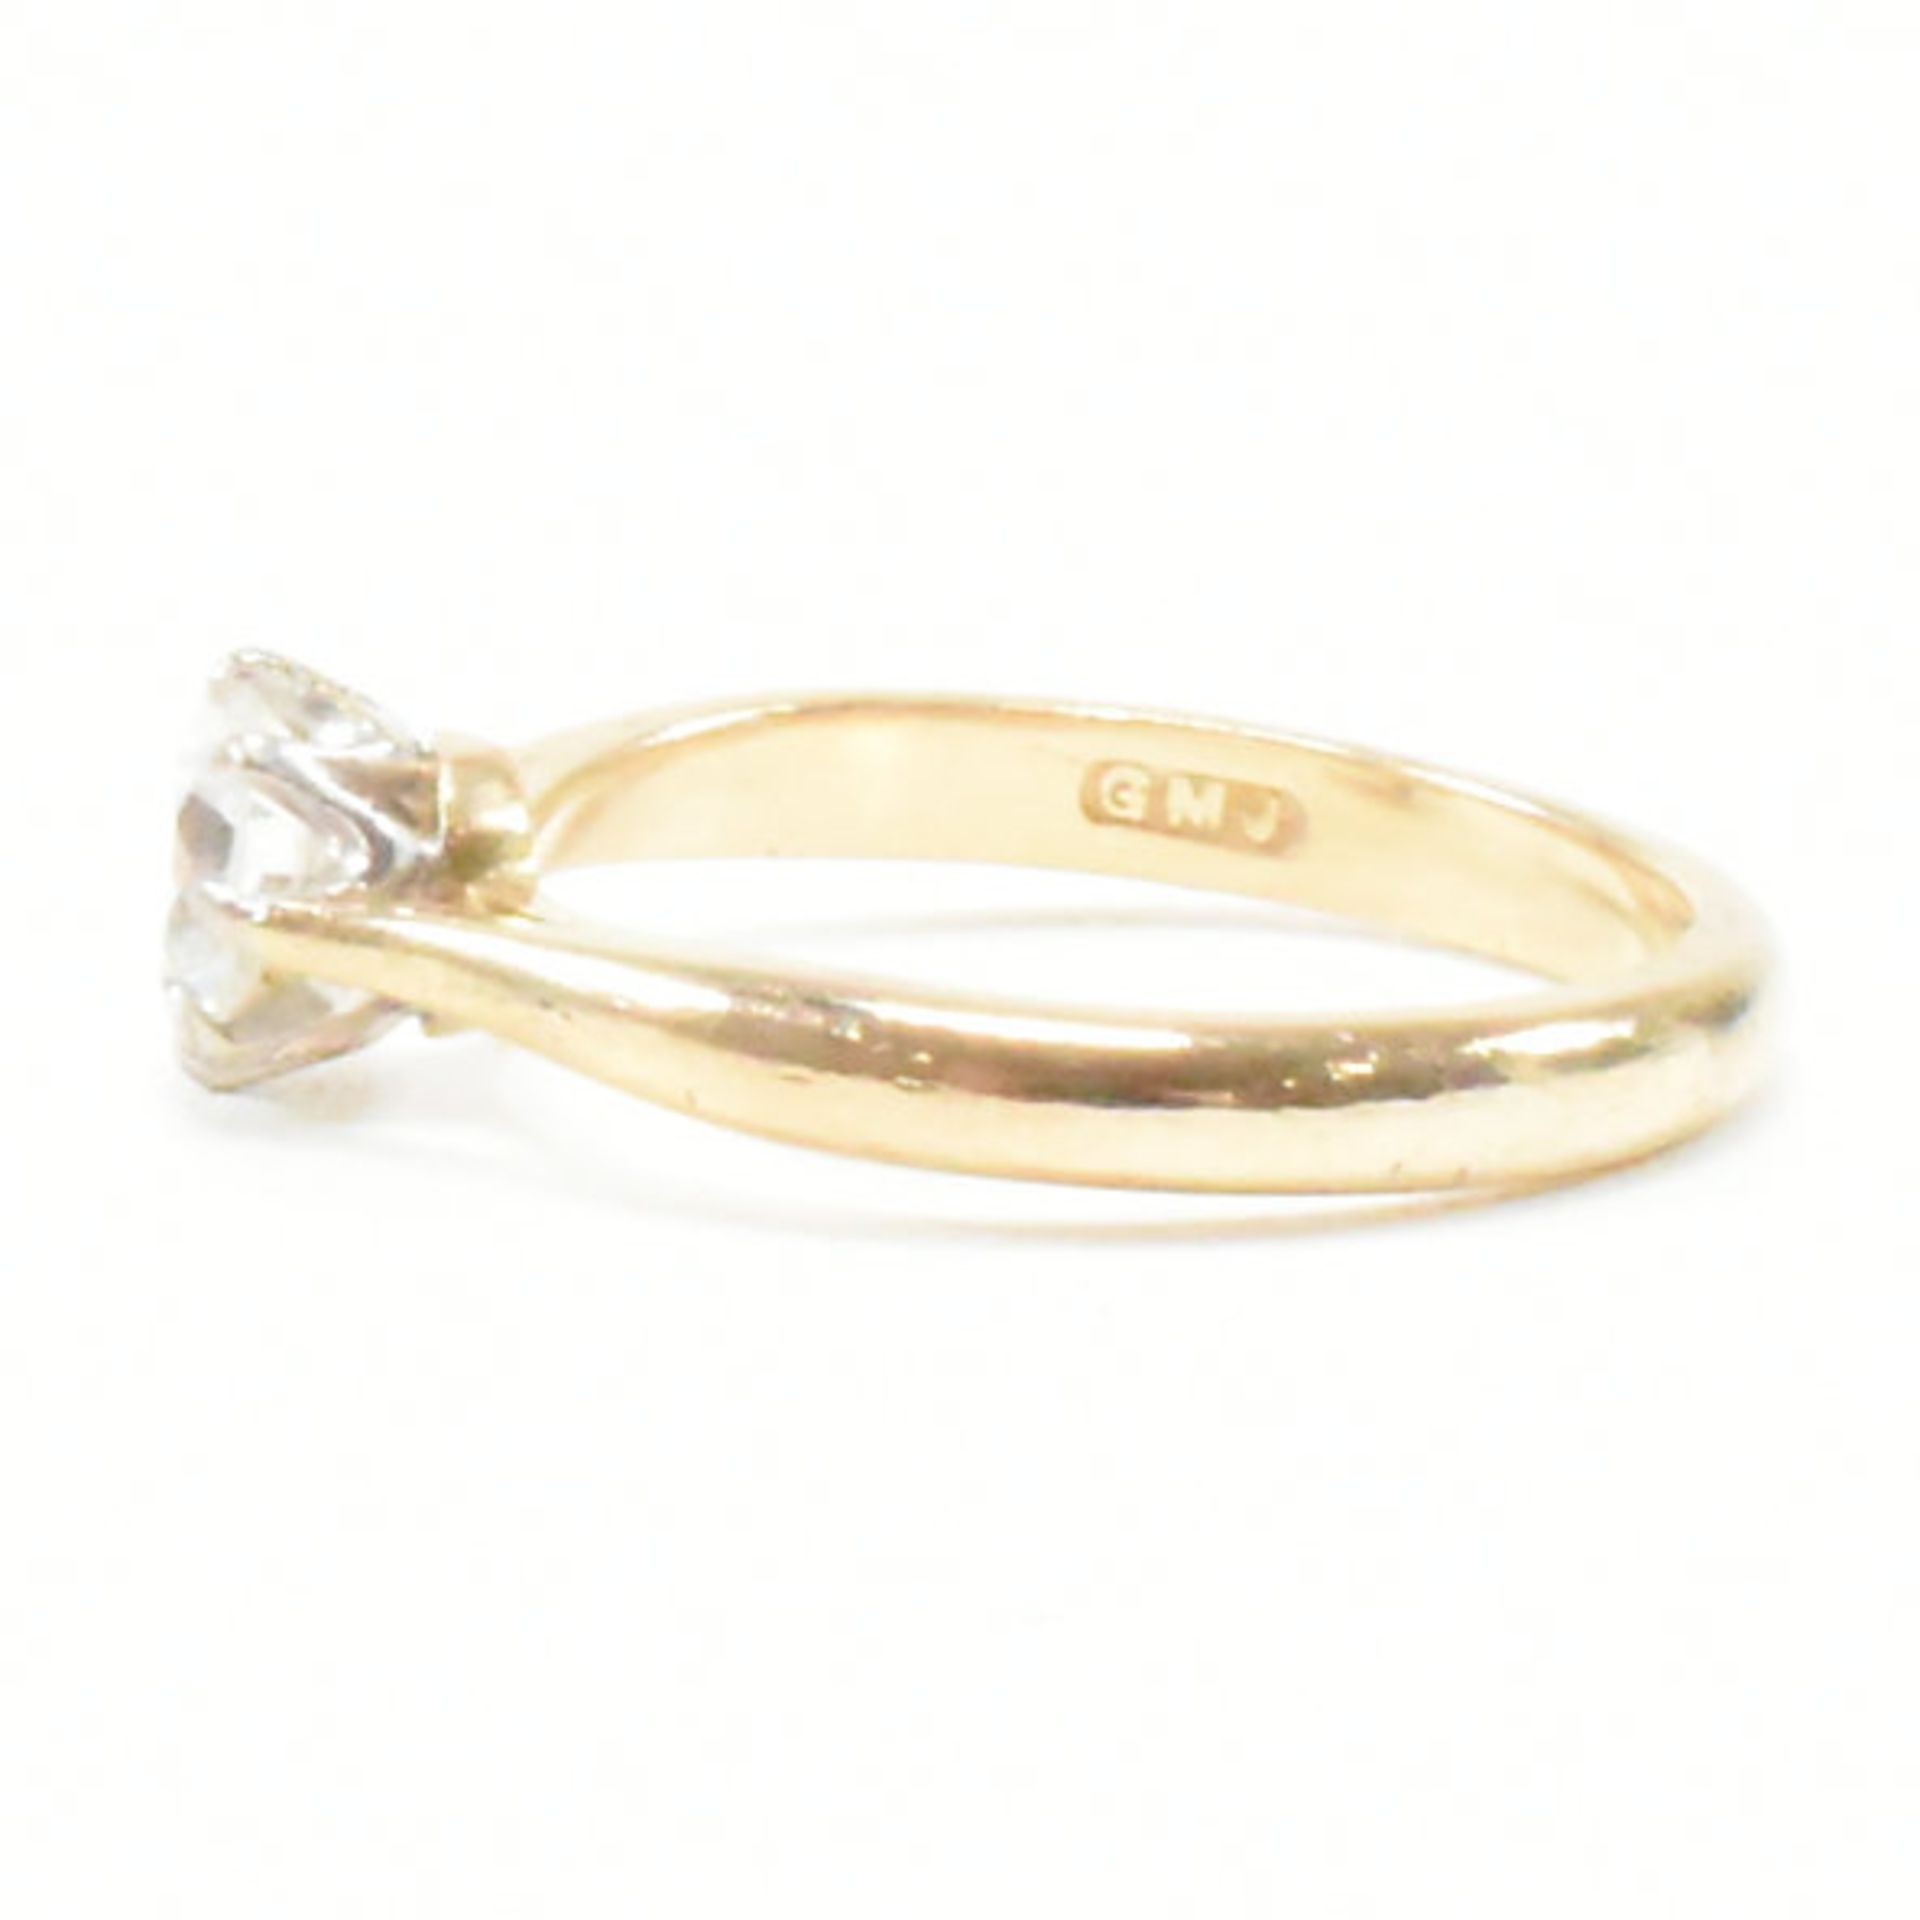 18CT GOLD & DIAMOND SOLITAIRE RING - Image 2 of 7